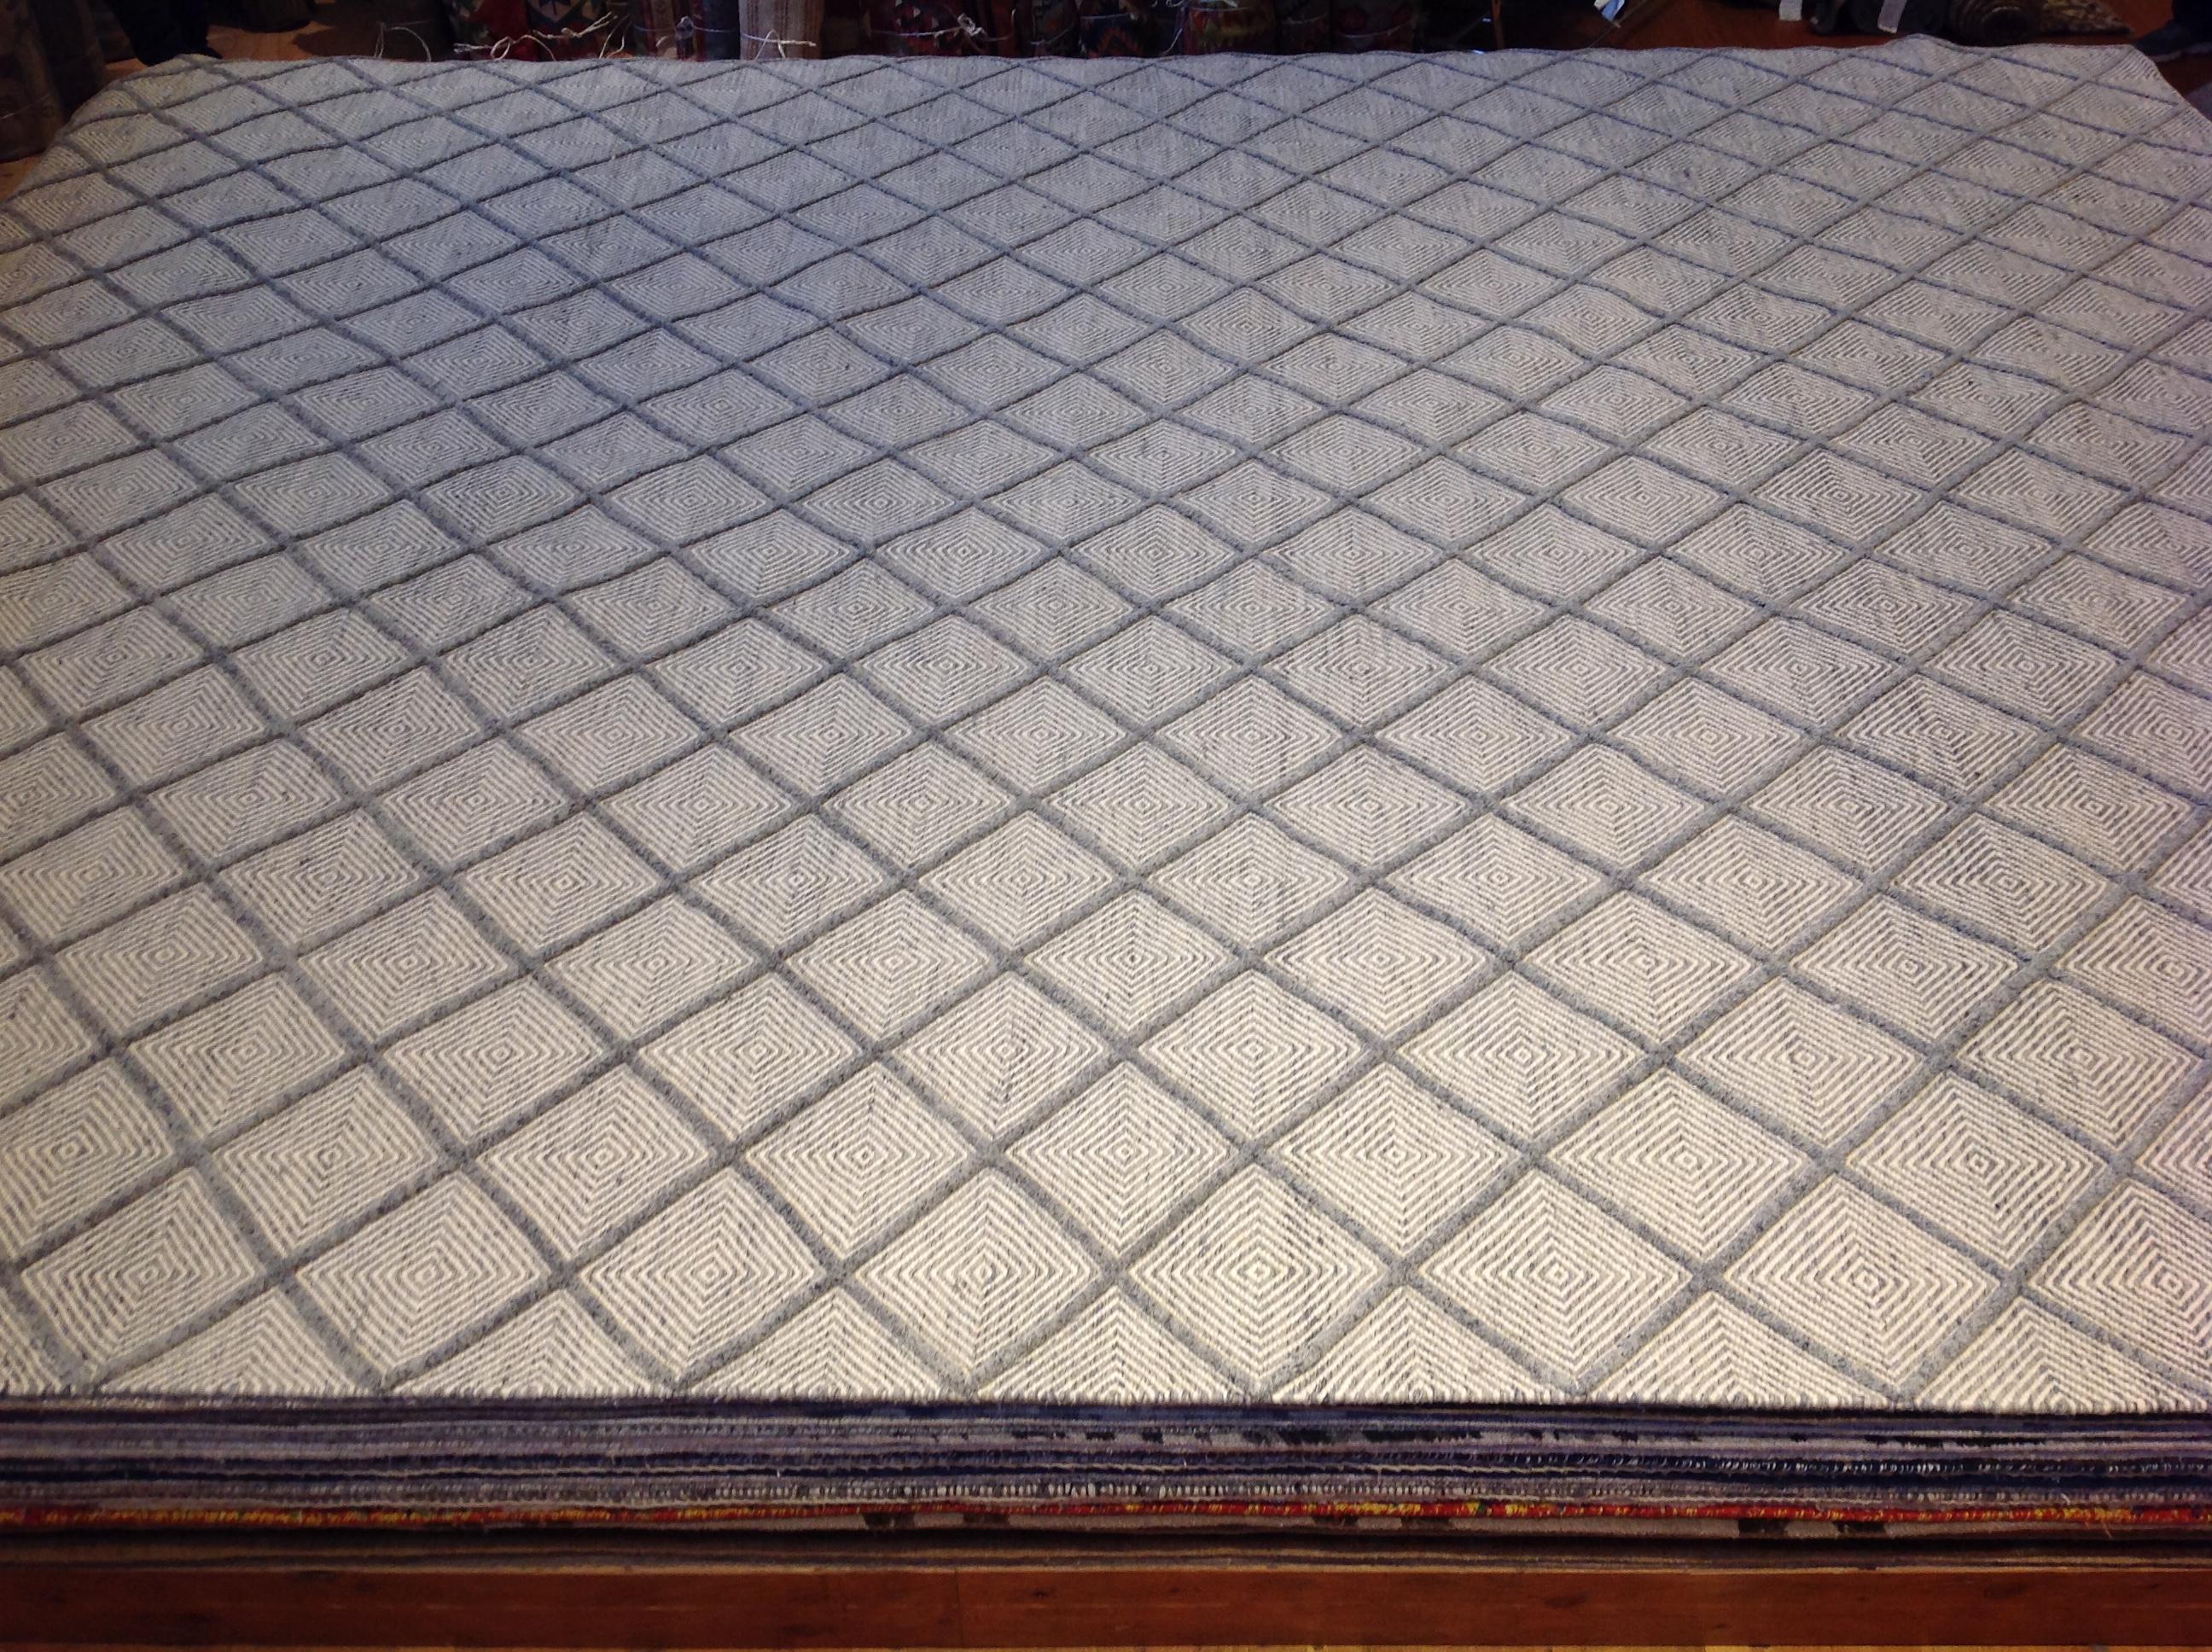 Diamonds within diamonds star in this high low rug with both visual and tactile appeal. Hand knotted wool. Made in India.